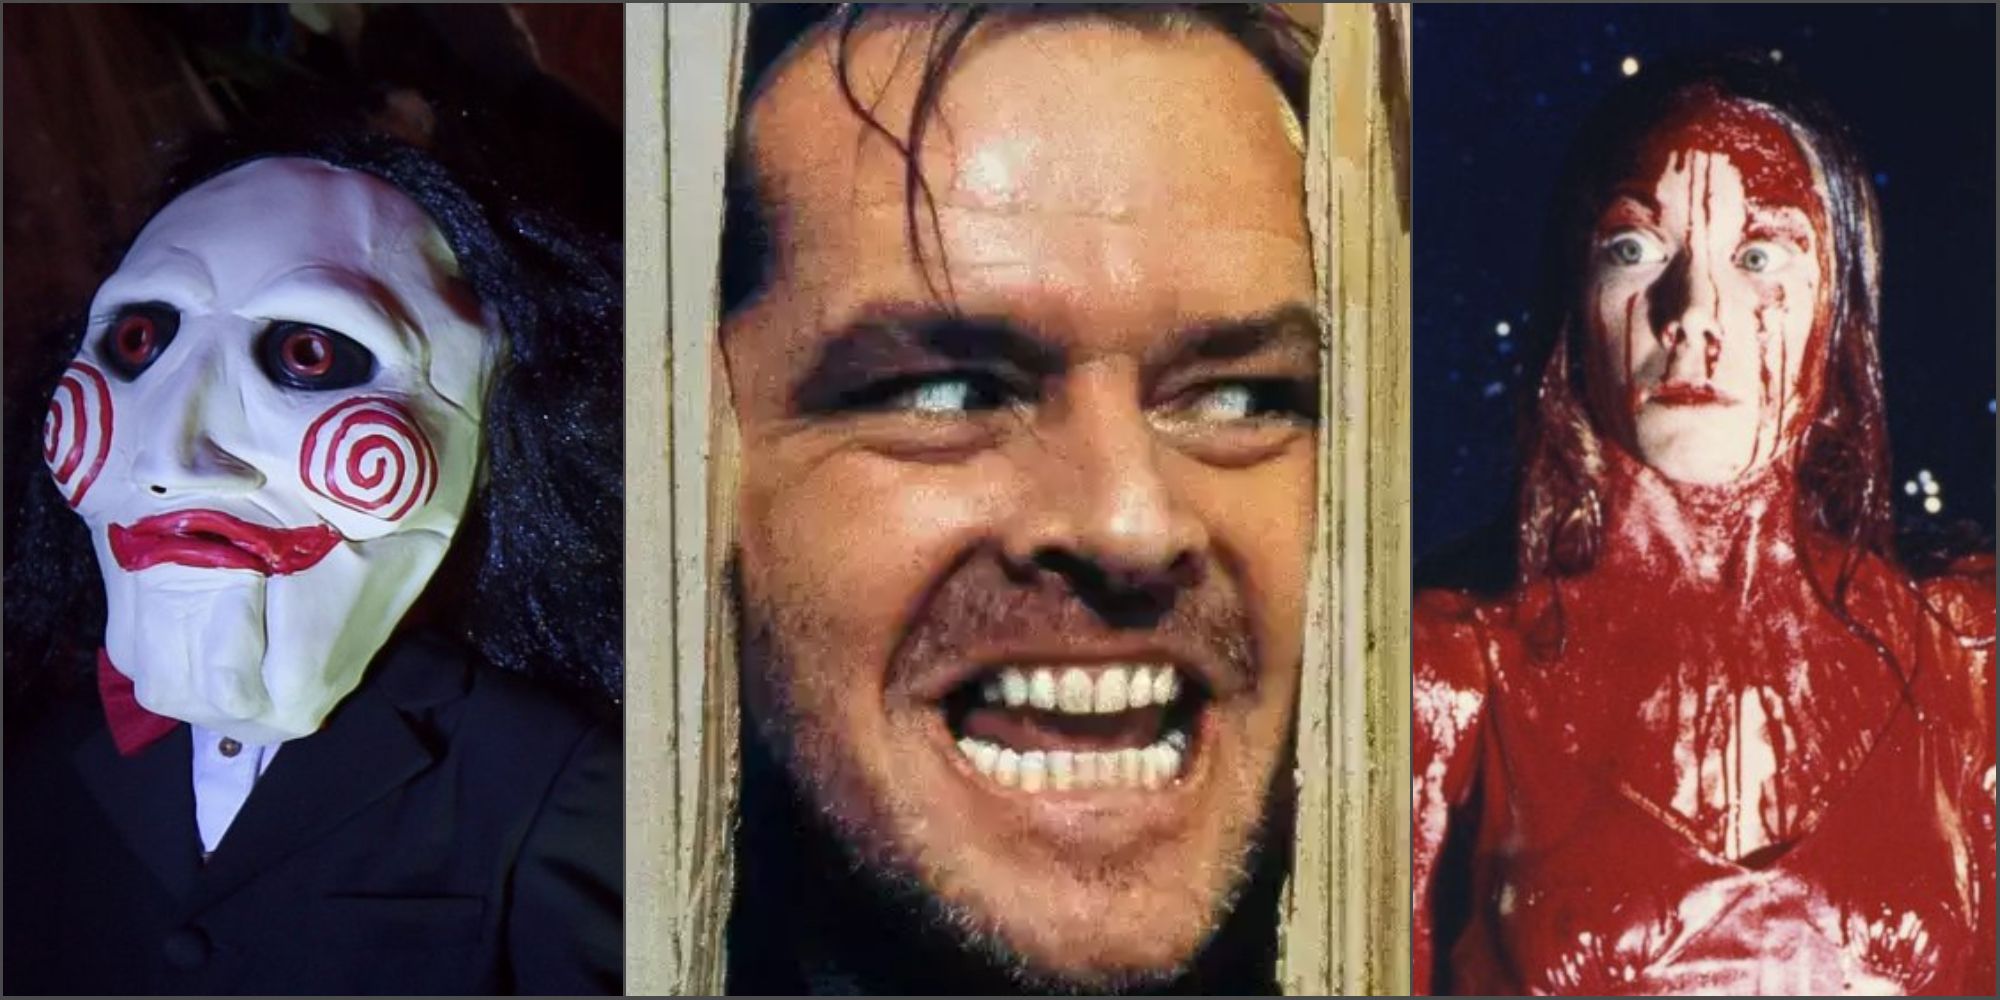 Horror movies: The Jigsaw puppet from Saw, Jack Torrance from The Shining, and Carrie from Carrie